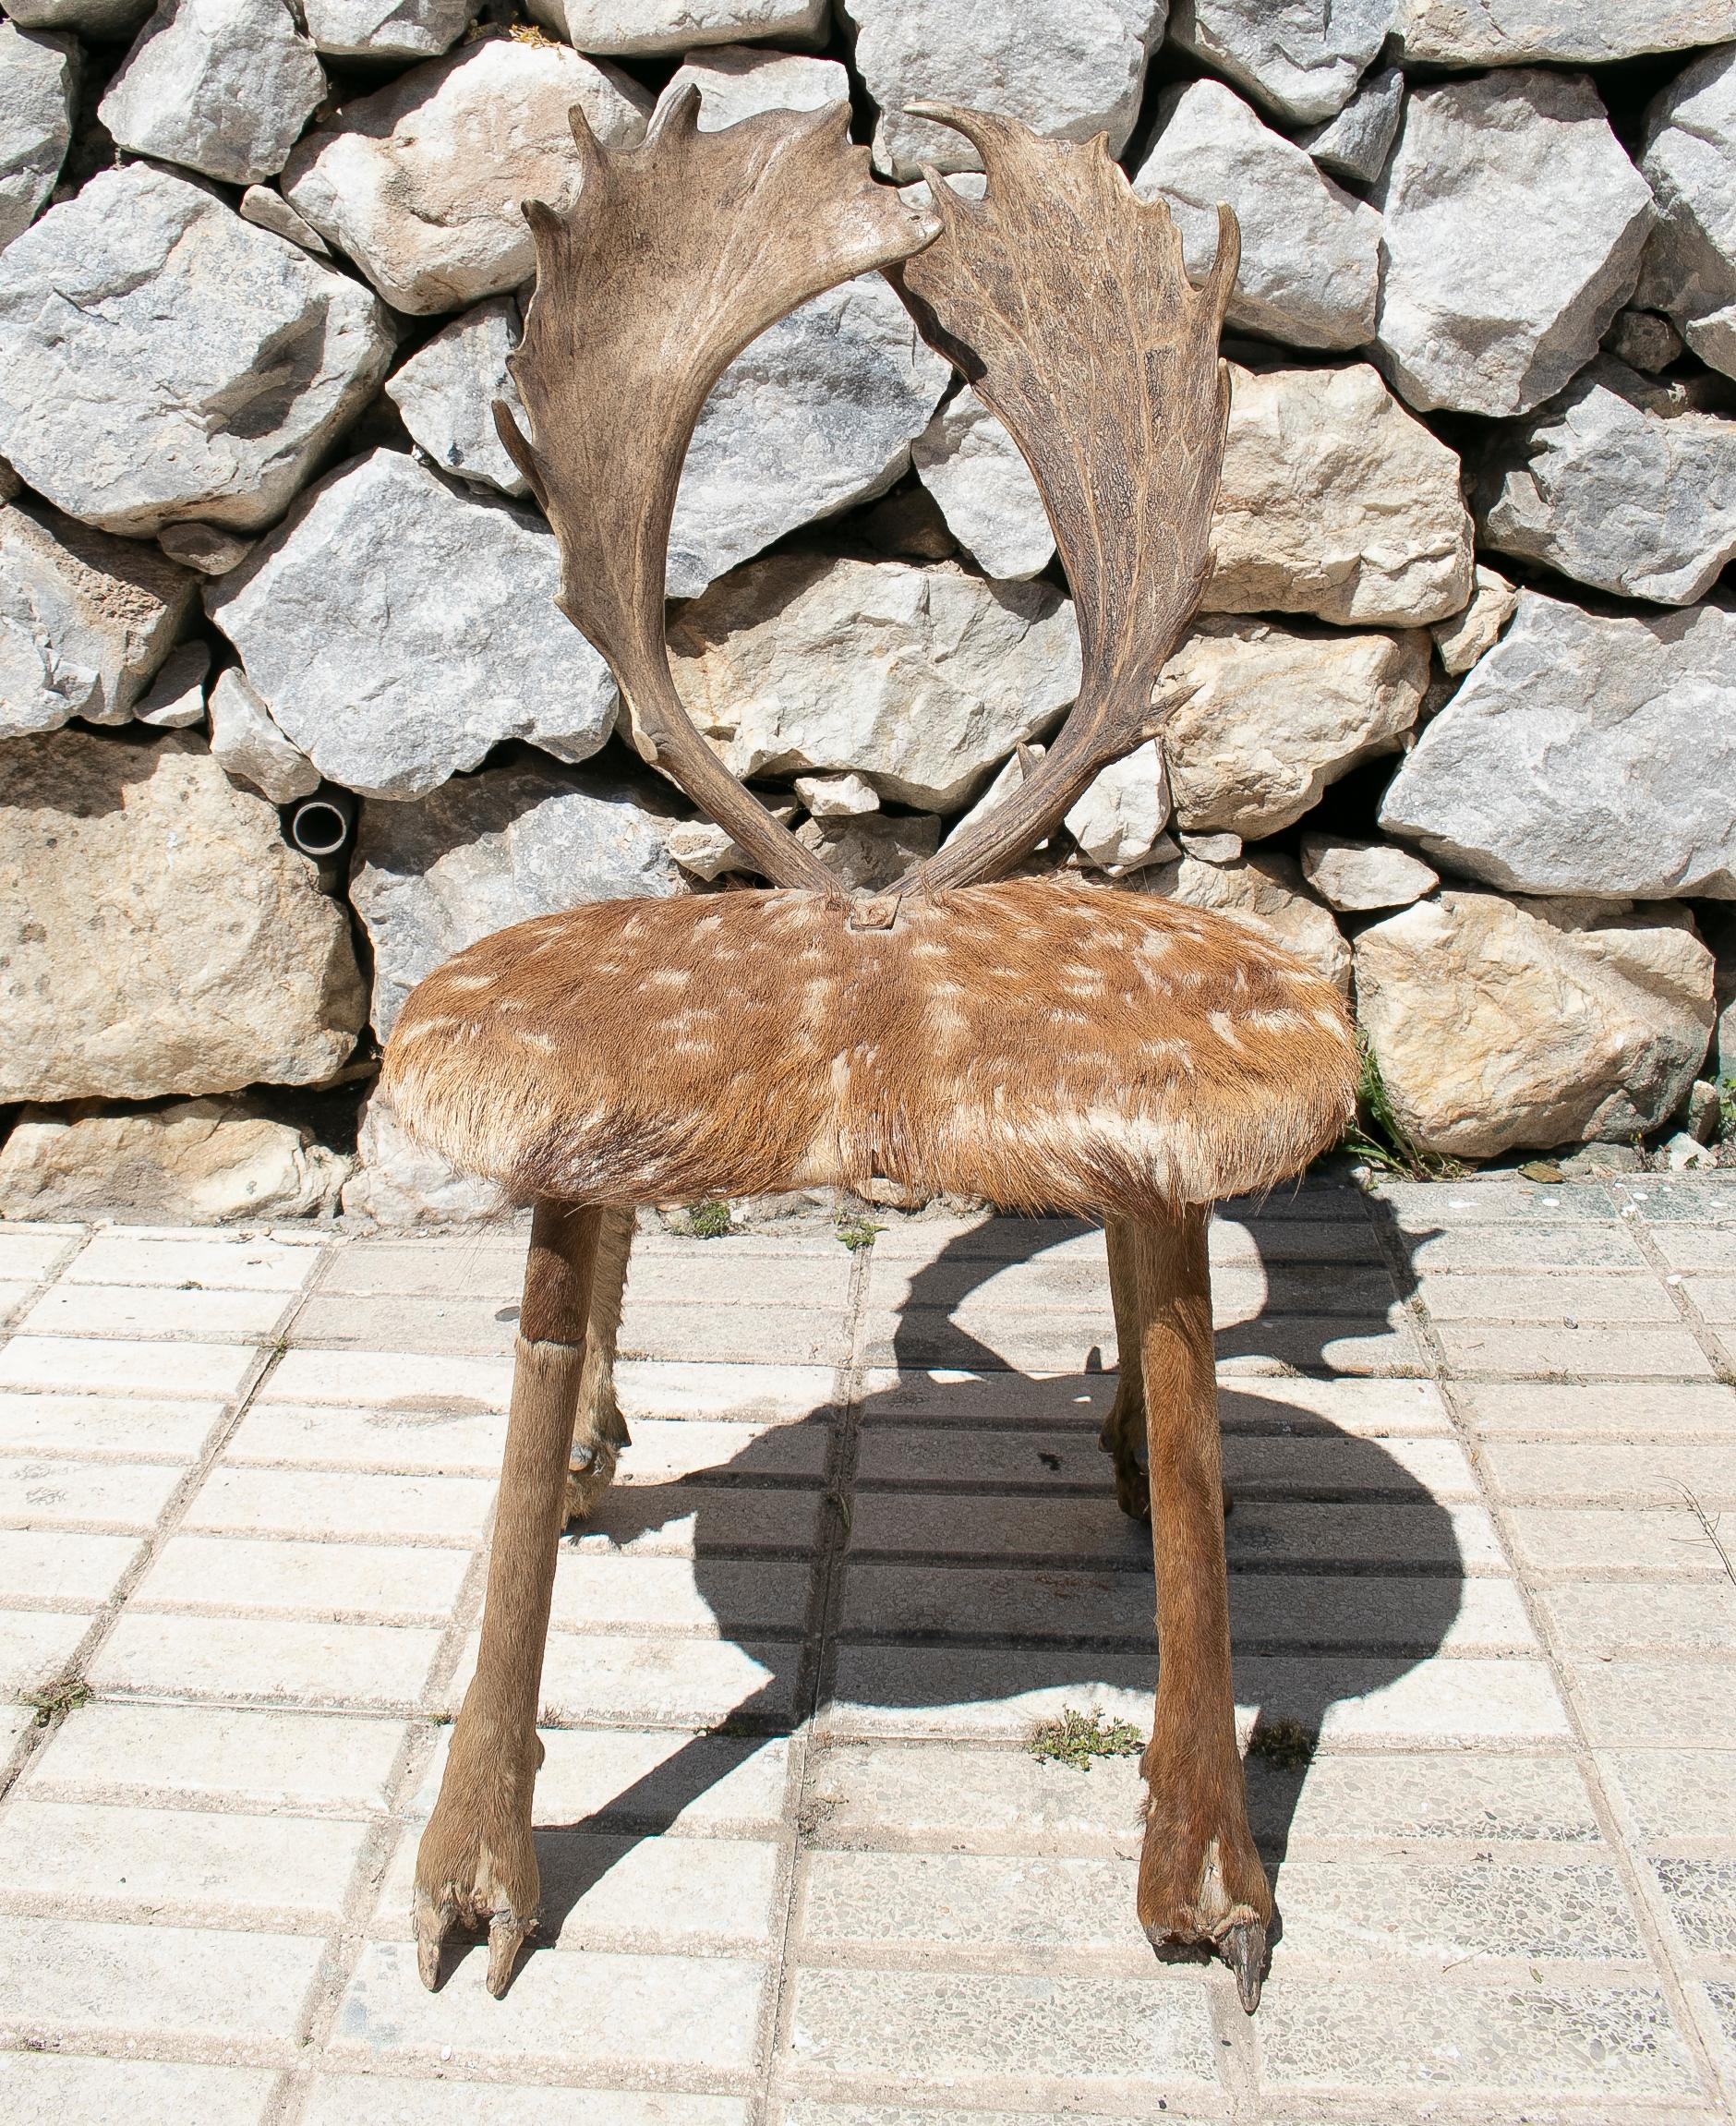 1970s Spanish deer antlers chair with fur seat and legs.